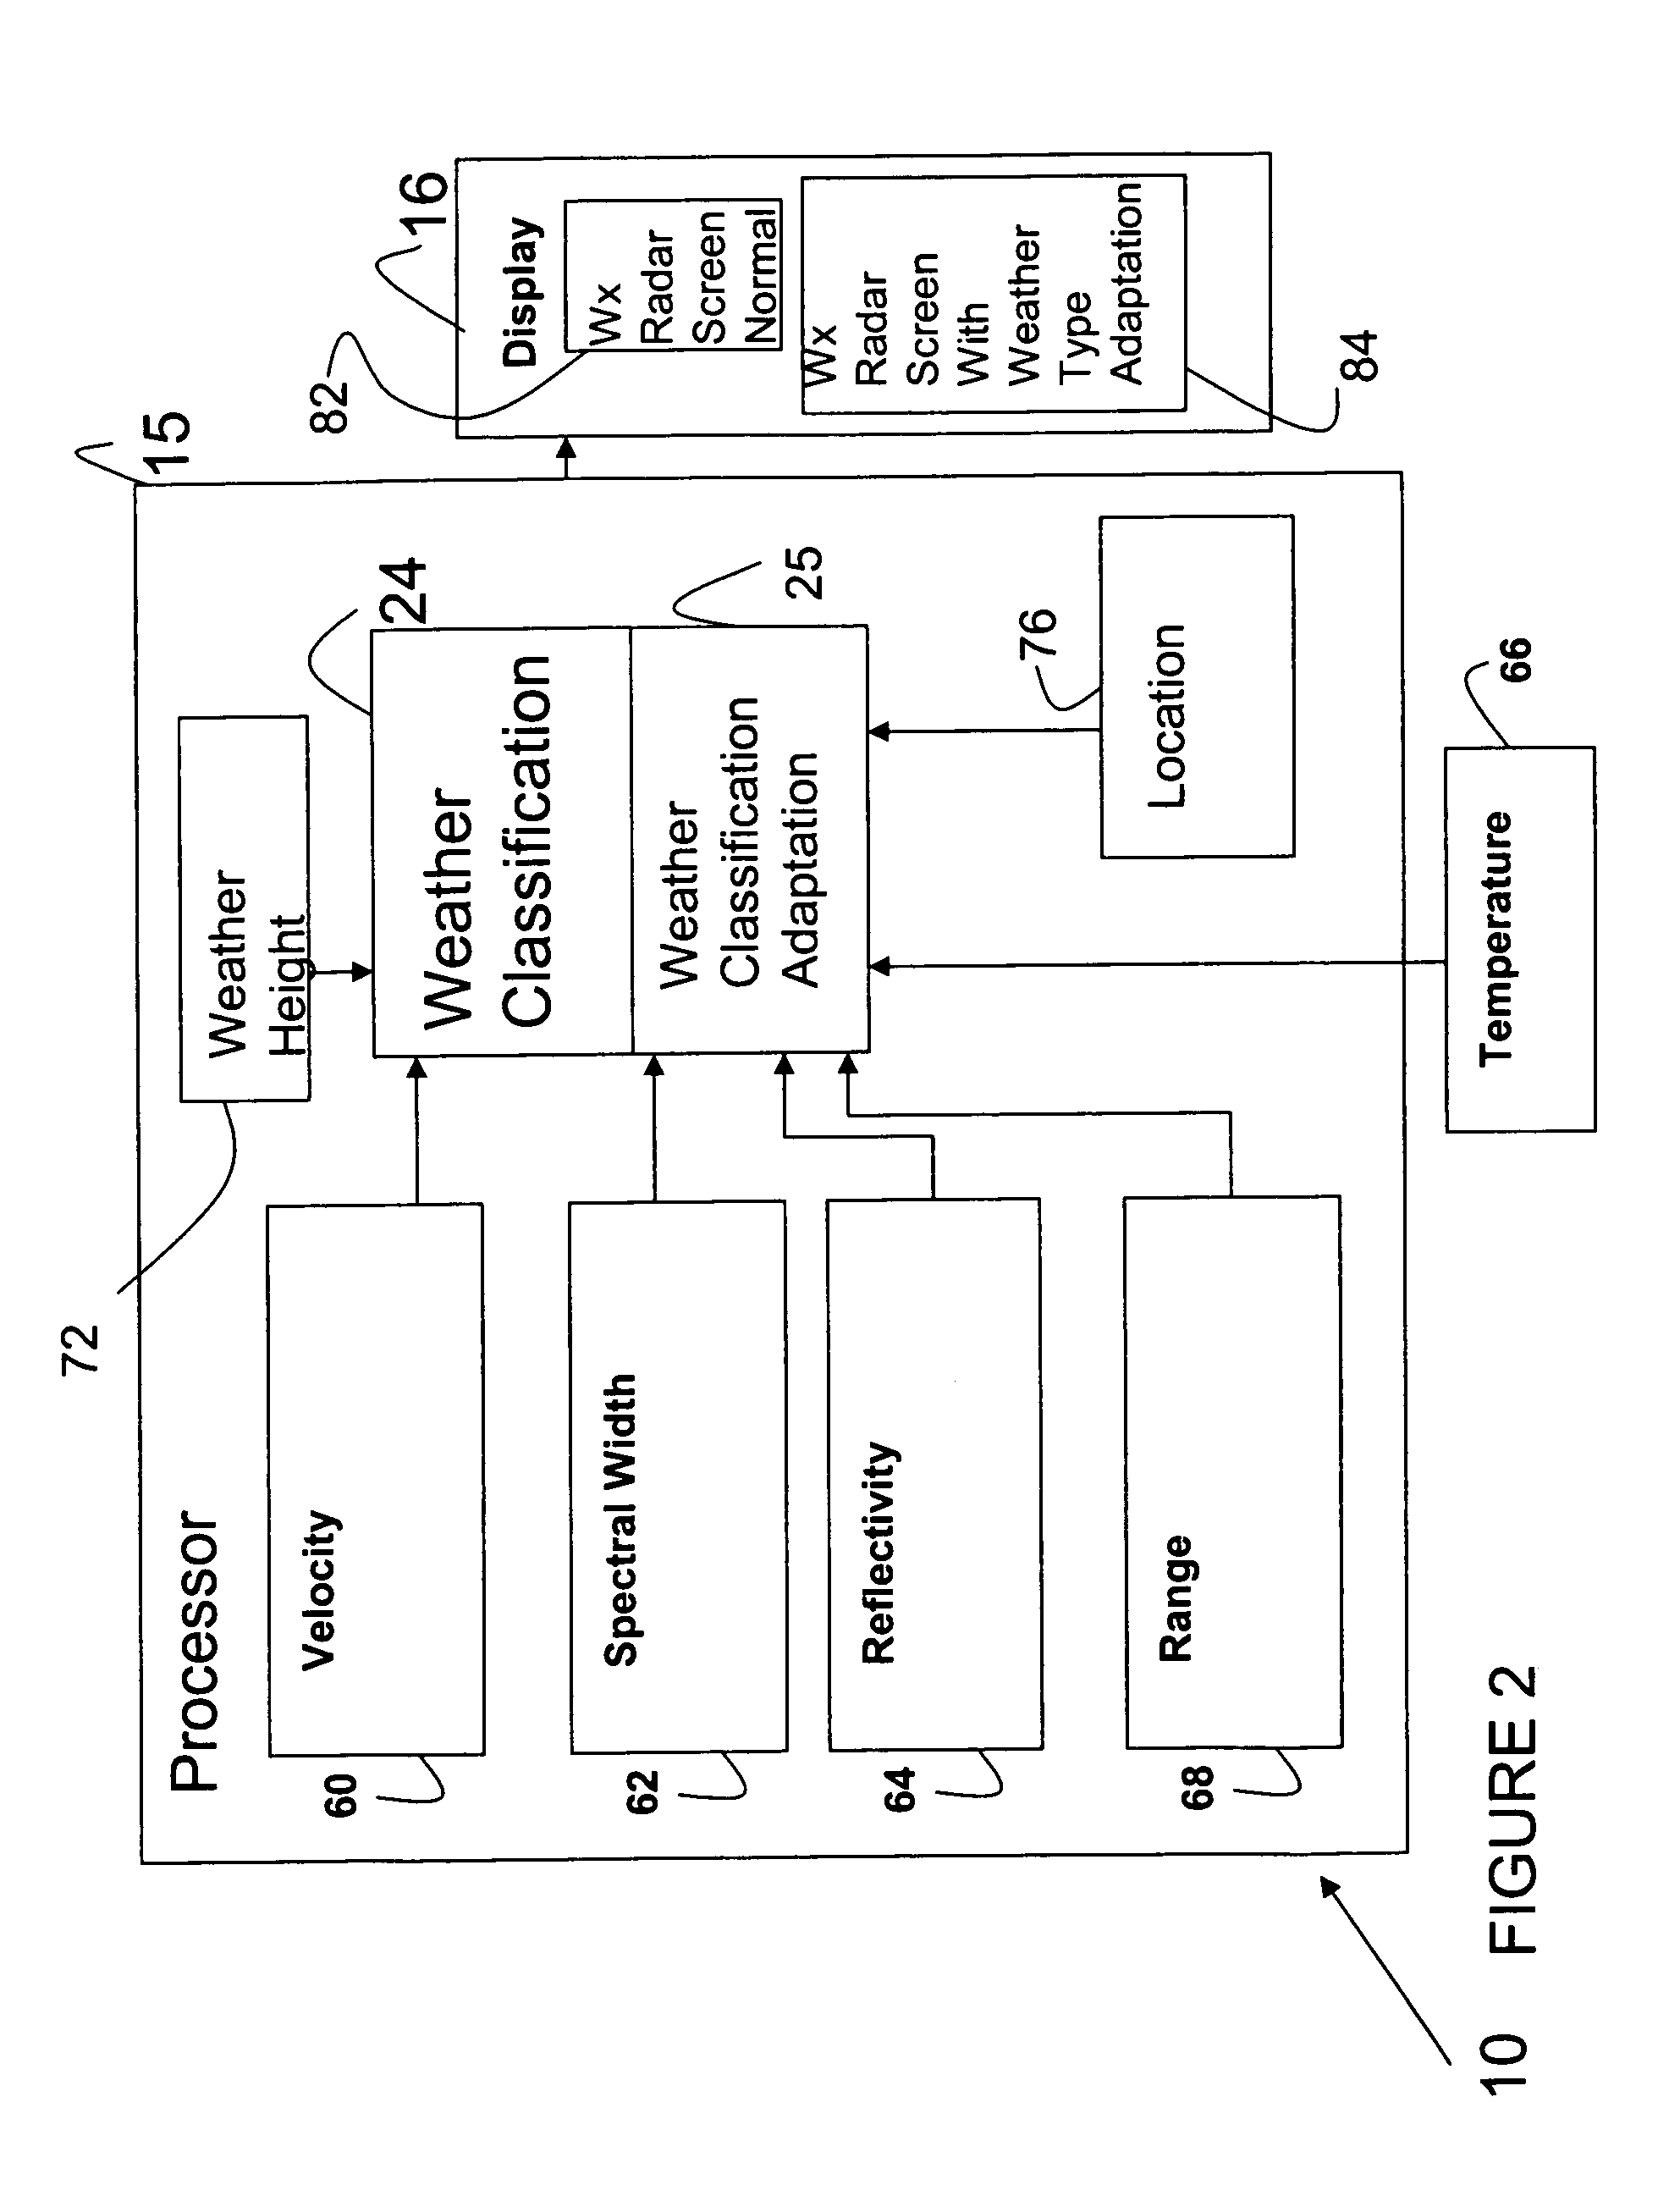 Weather radar detection system and method that is adaptive to weather characteristics